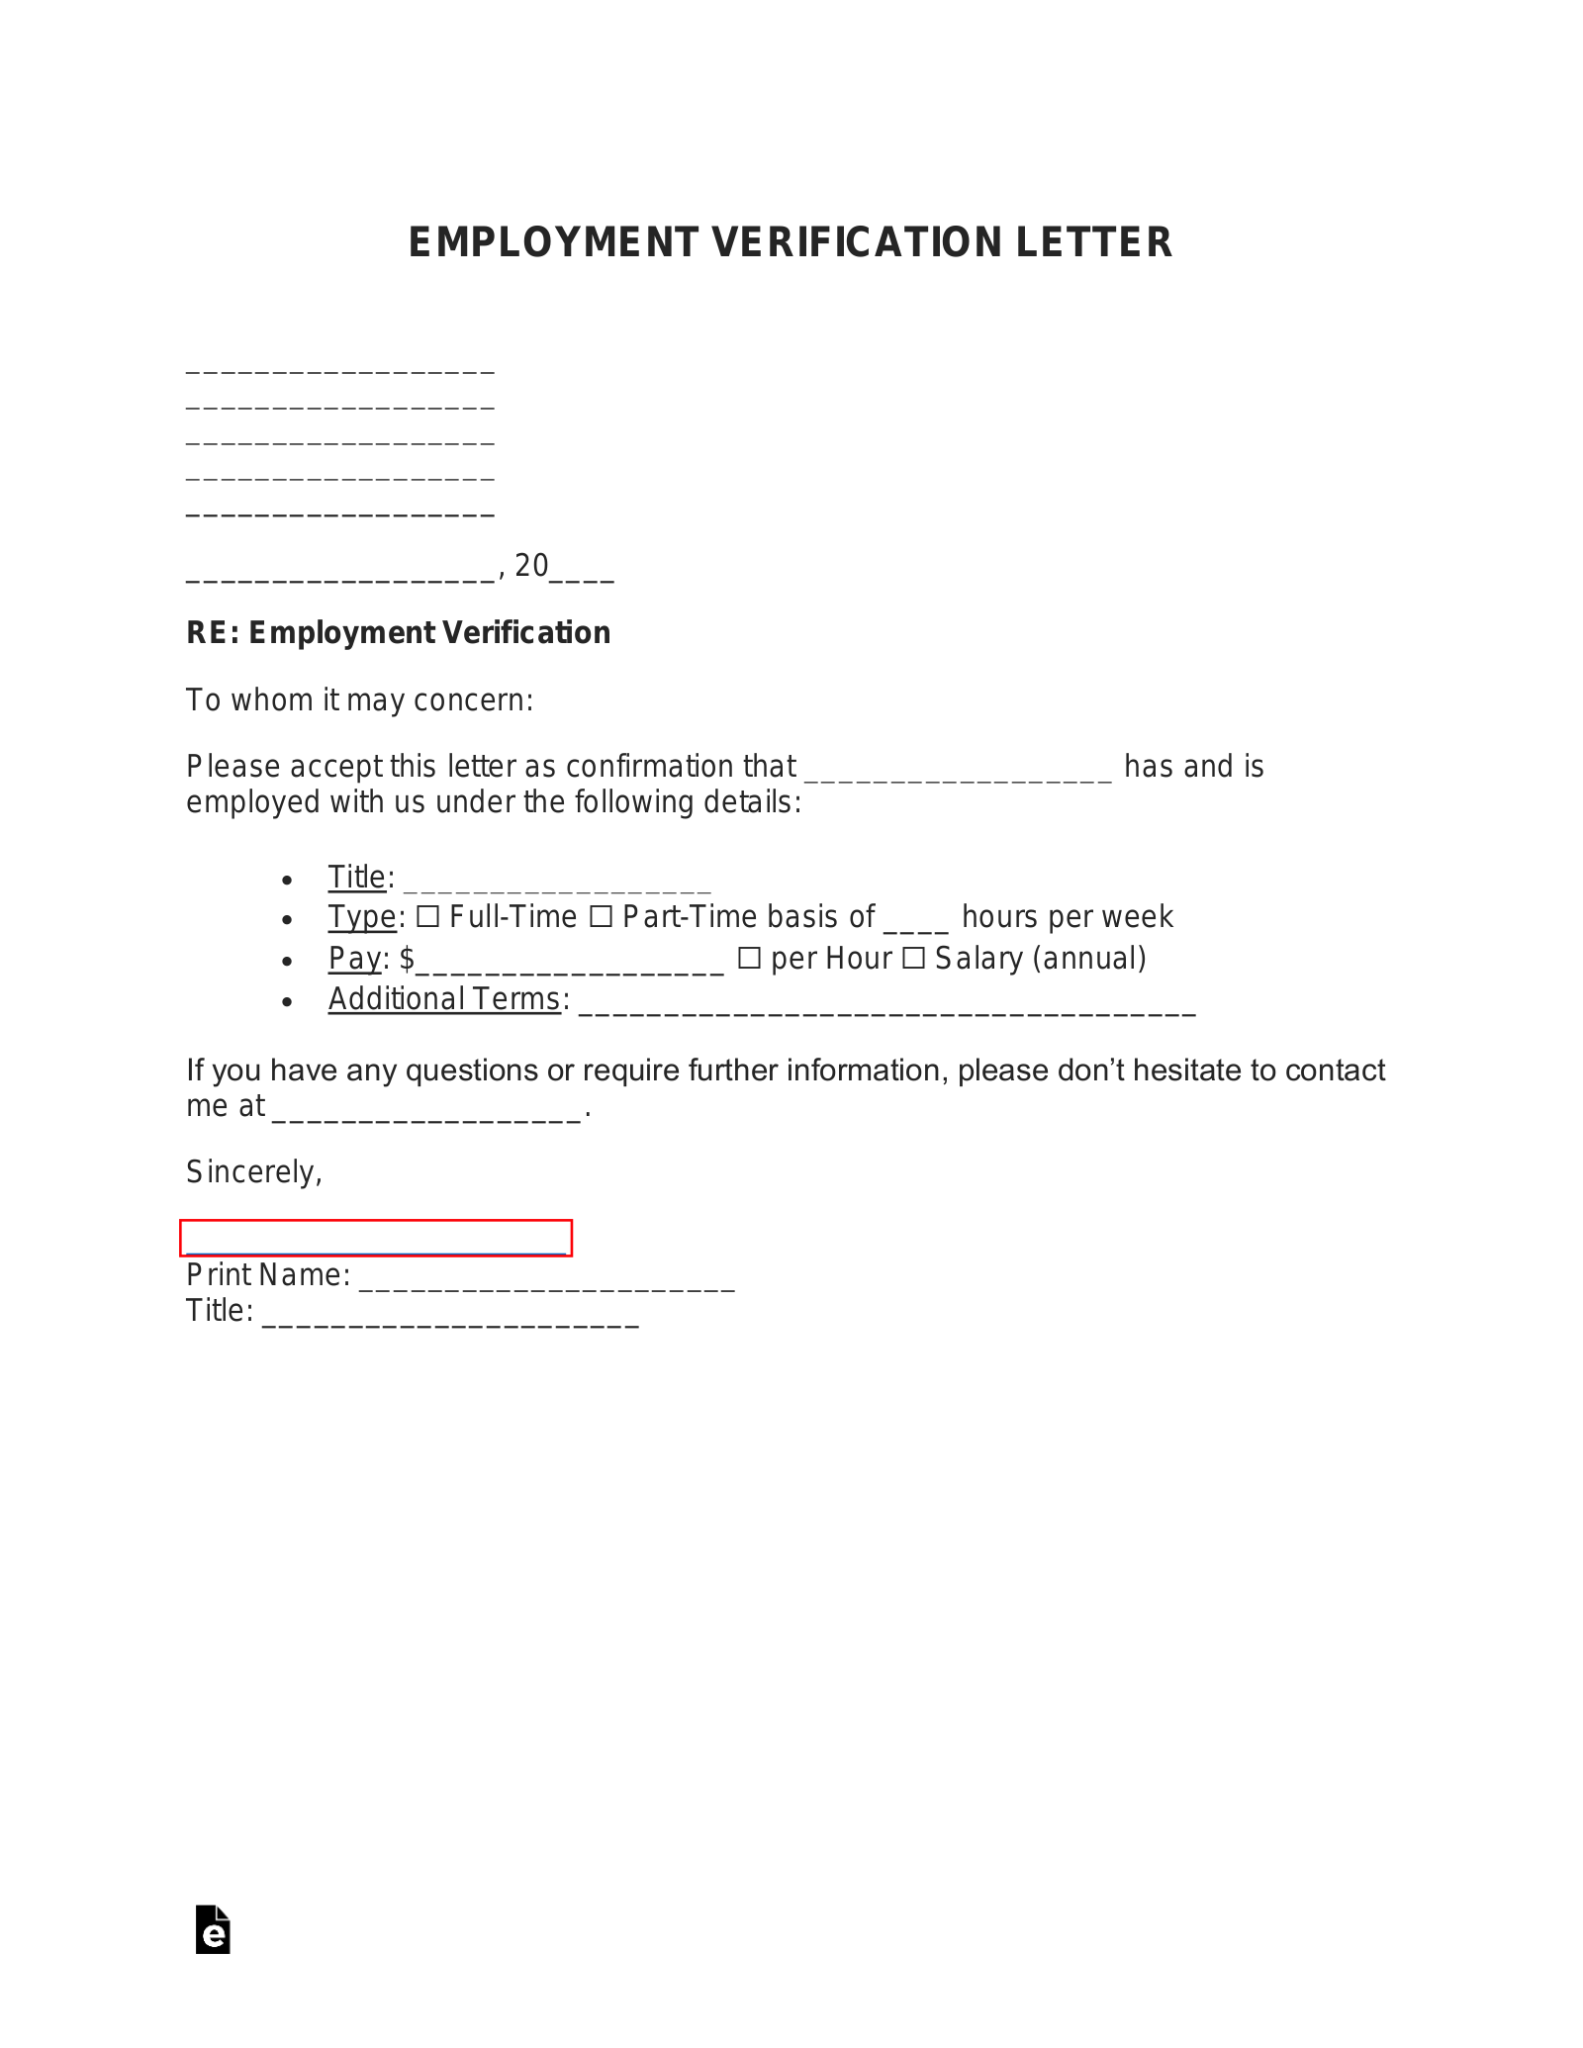 employment-verification-form-template-pdf-cover-letters-samples-my